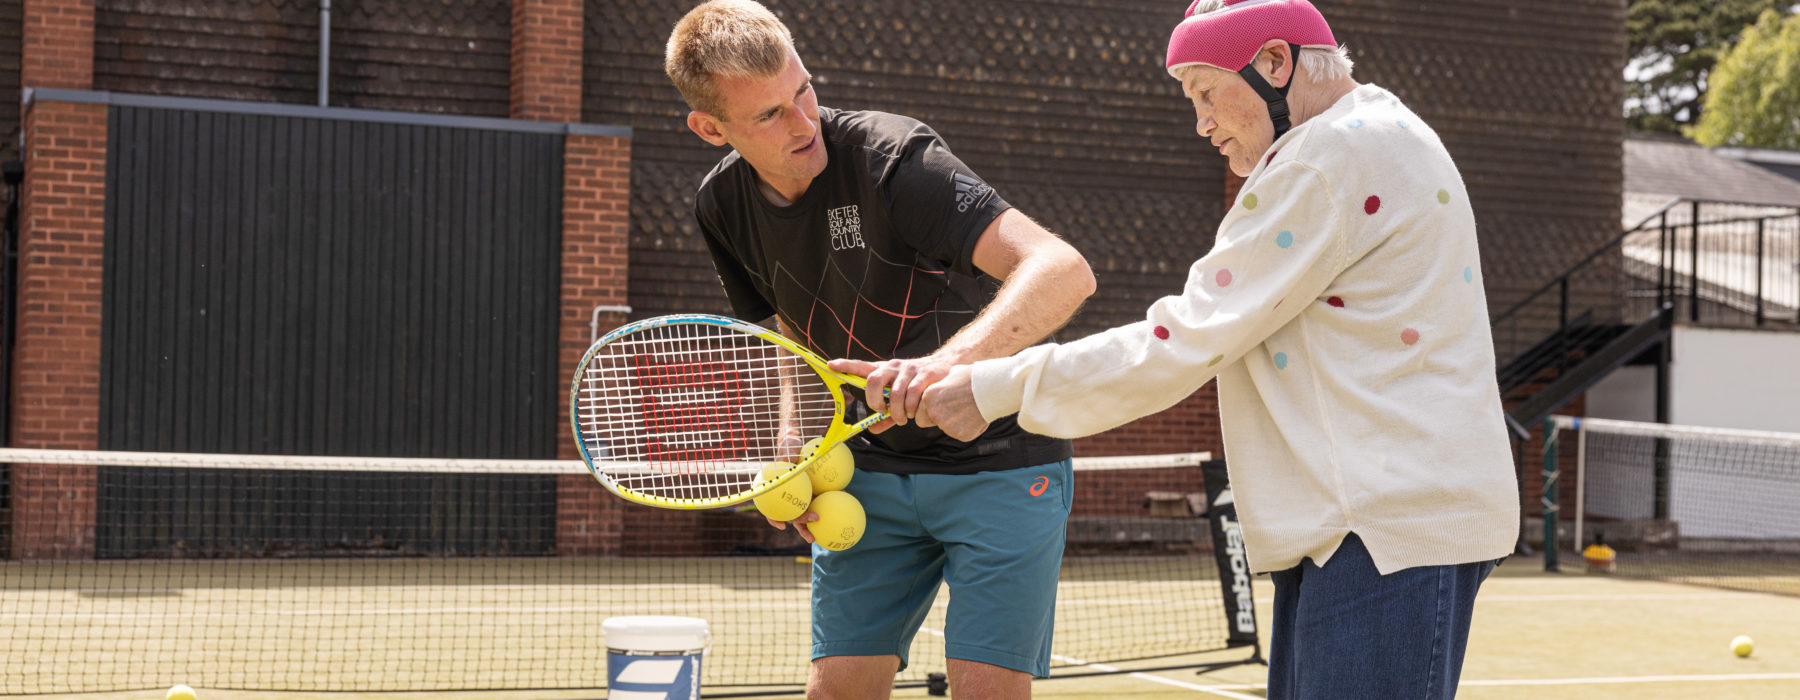 a man helps a woman by showing her how to hold a racket